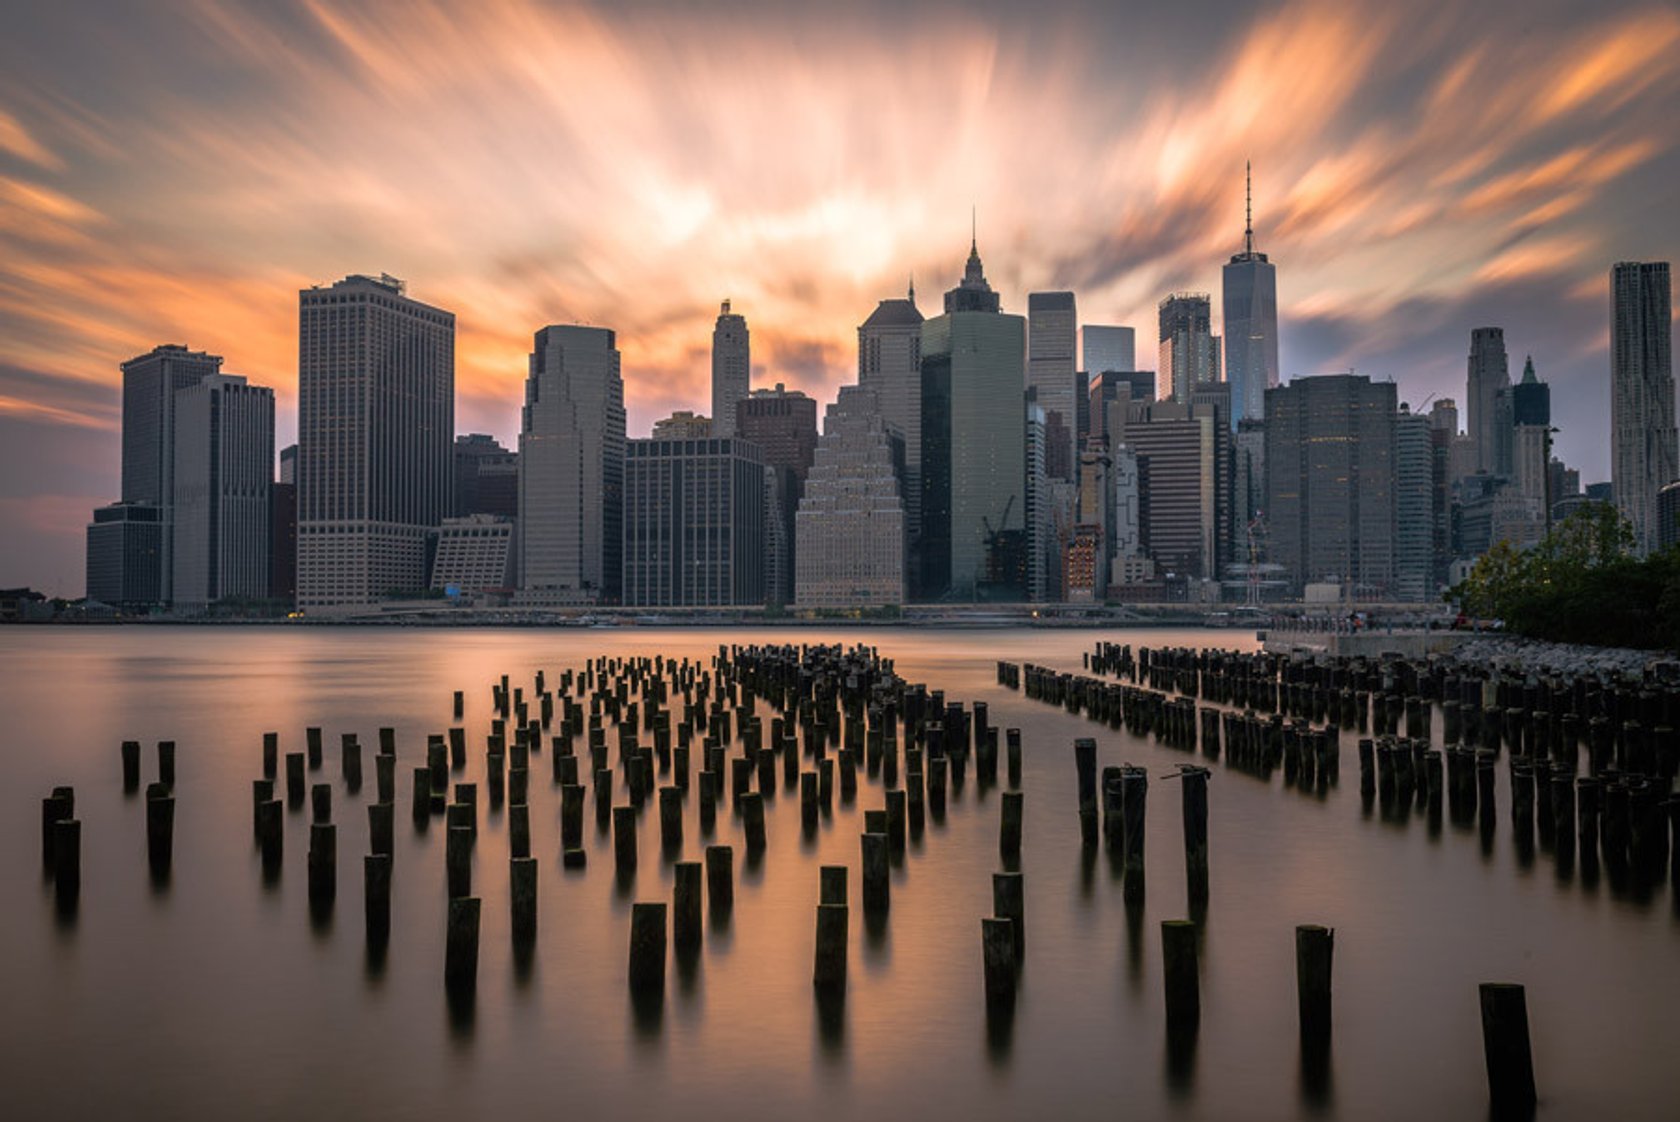 How To Create Stunning Golden Hour and Night Cityscapes - 500px